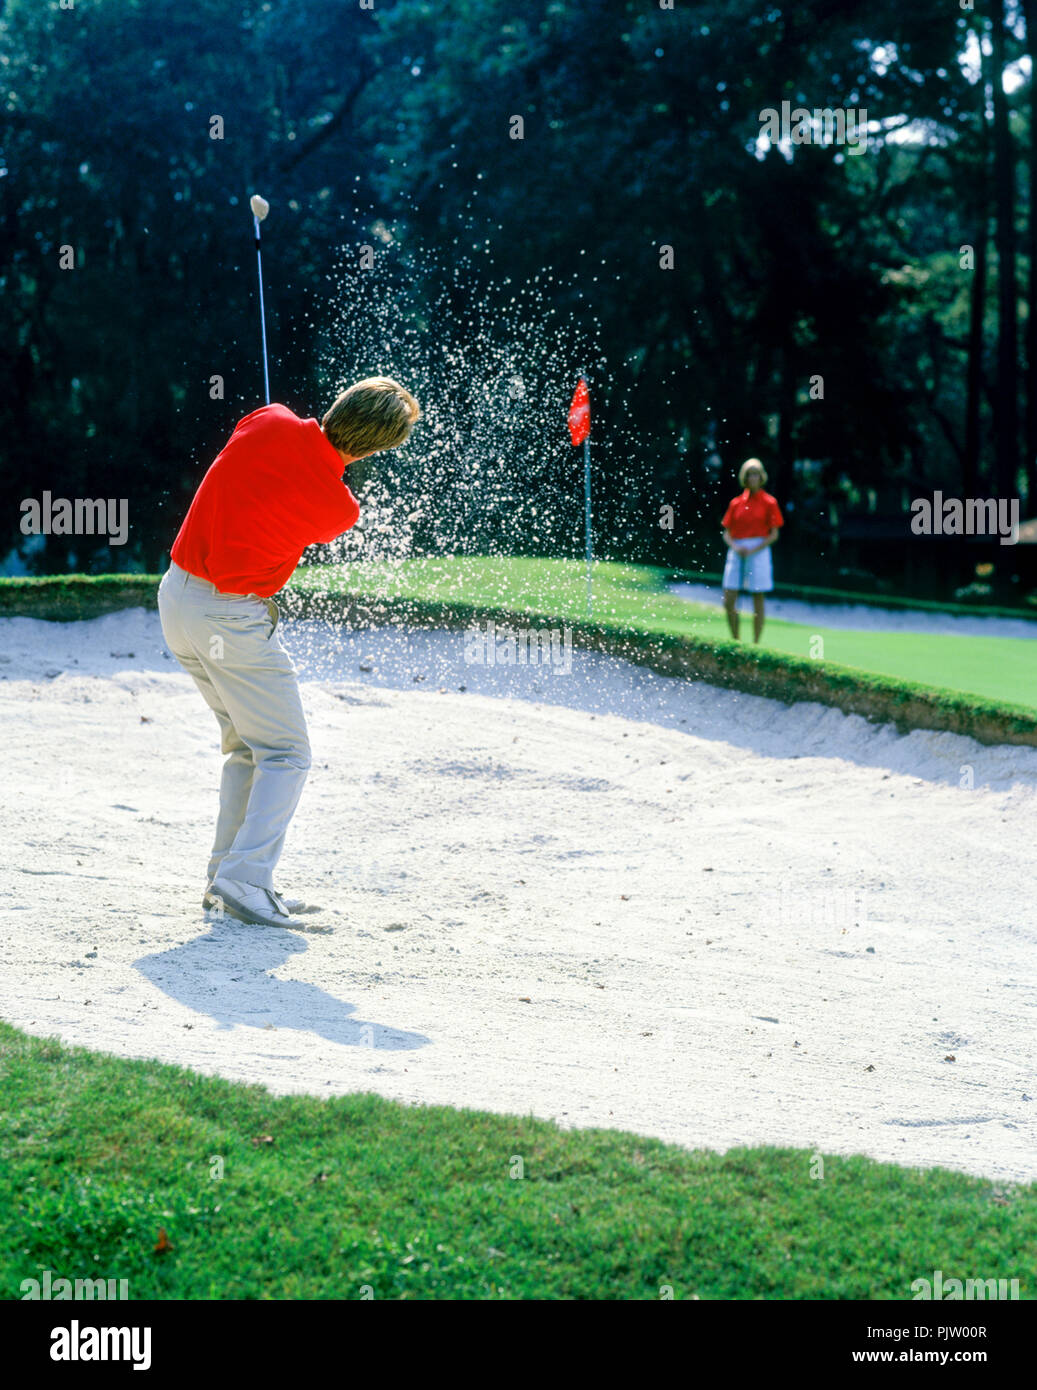 1990 HISTORICAL MALE GOLFER HITS BALL OUT OF SAND TRAP ON TO PUTTING GREEN Stock Photo